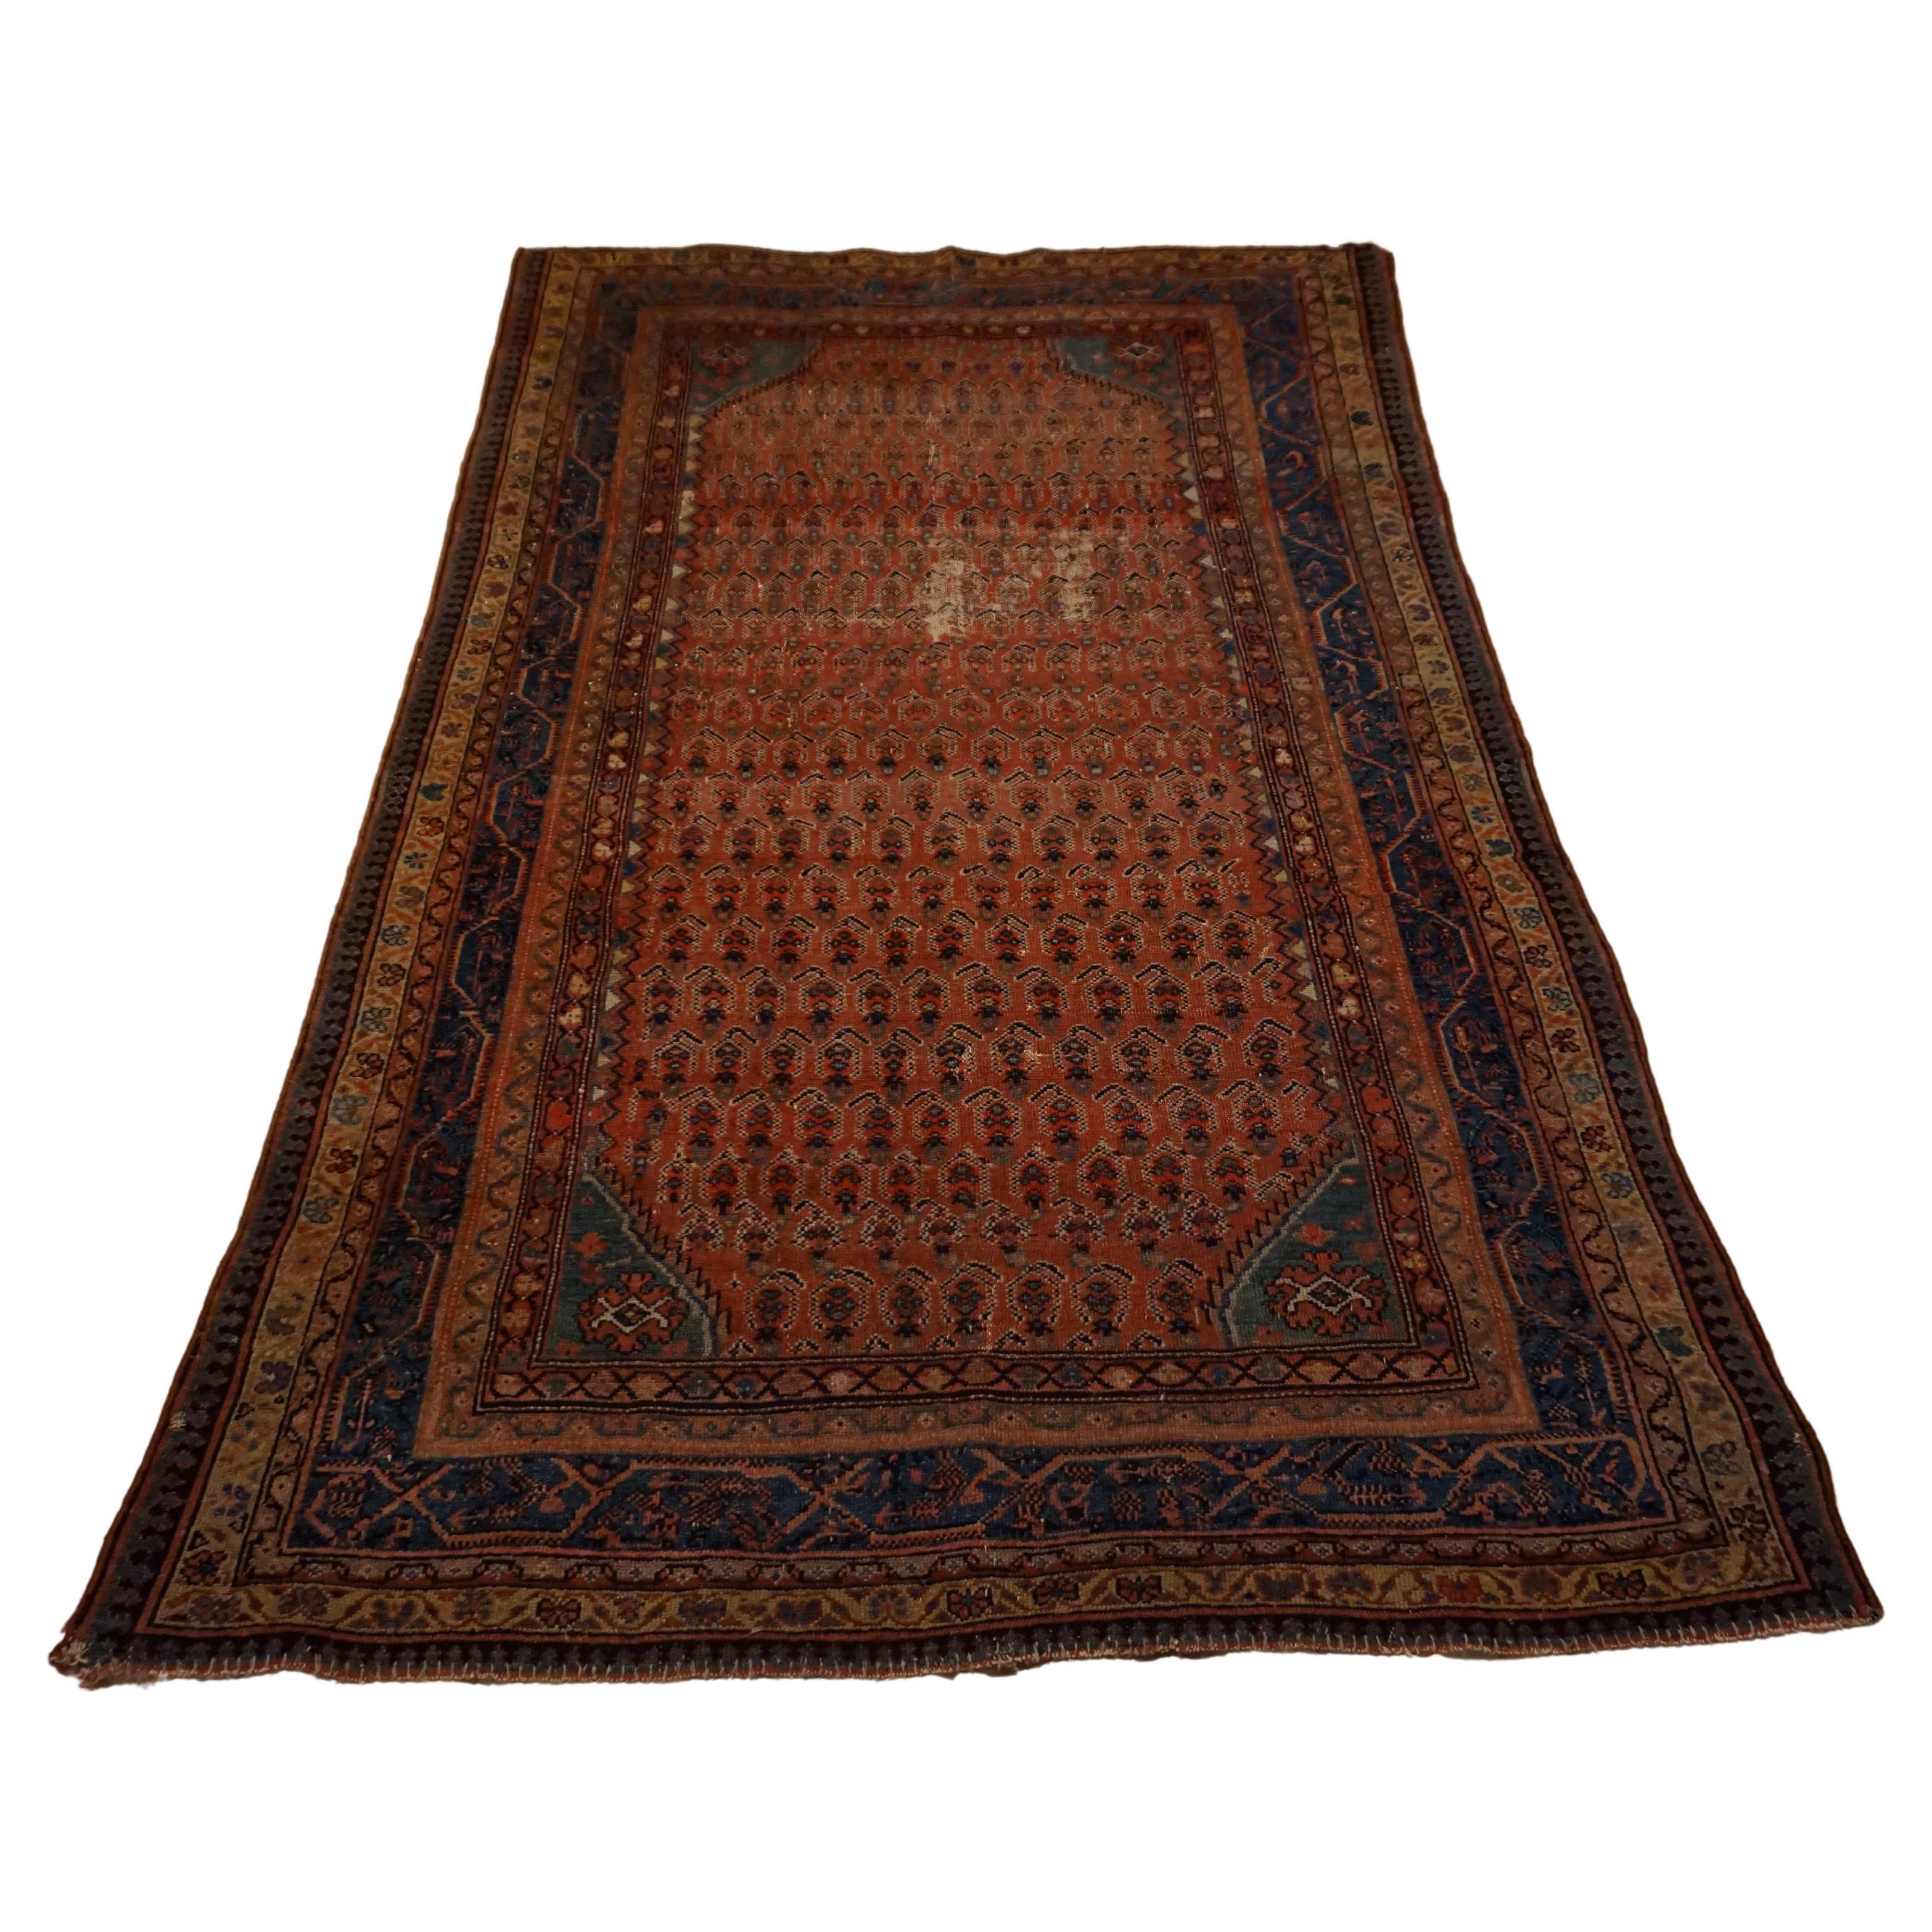 19th Century Tribal Boteh Paisley Hand-knotted Rug In Rust Hues For Sale